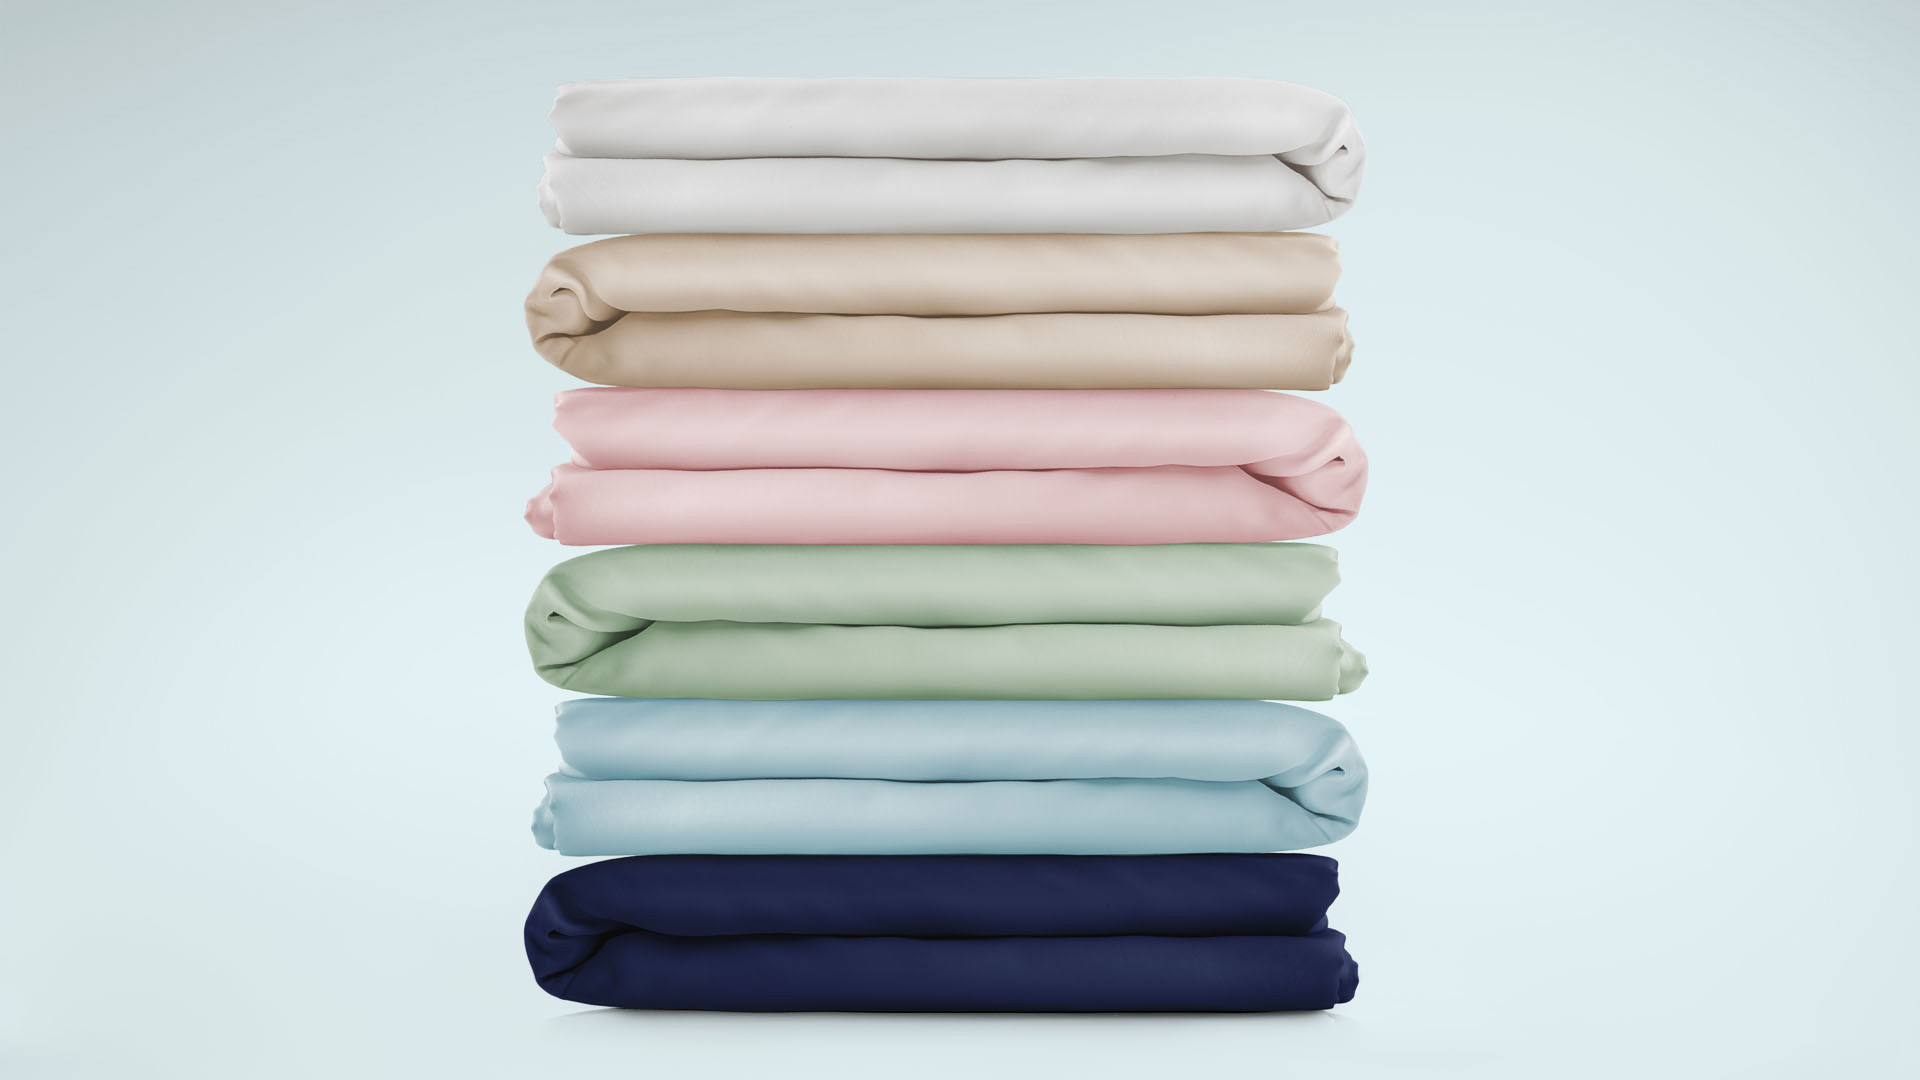 Folded fitted sheets on top of each other